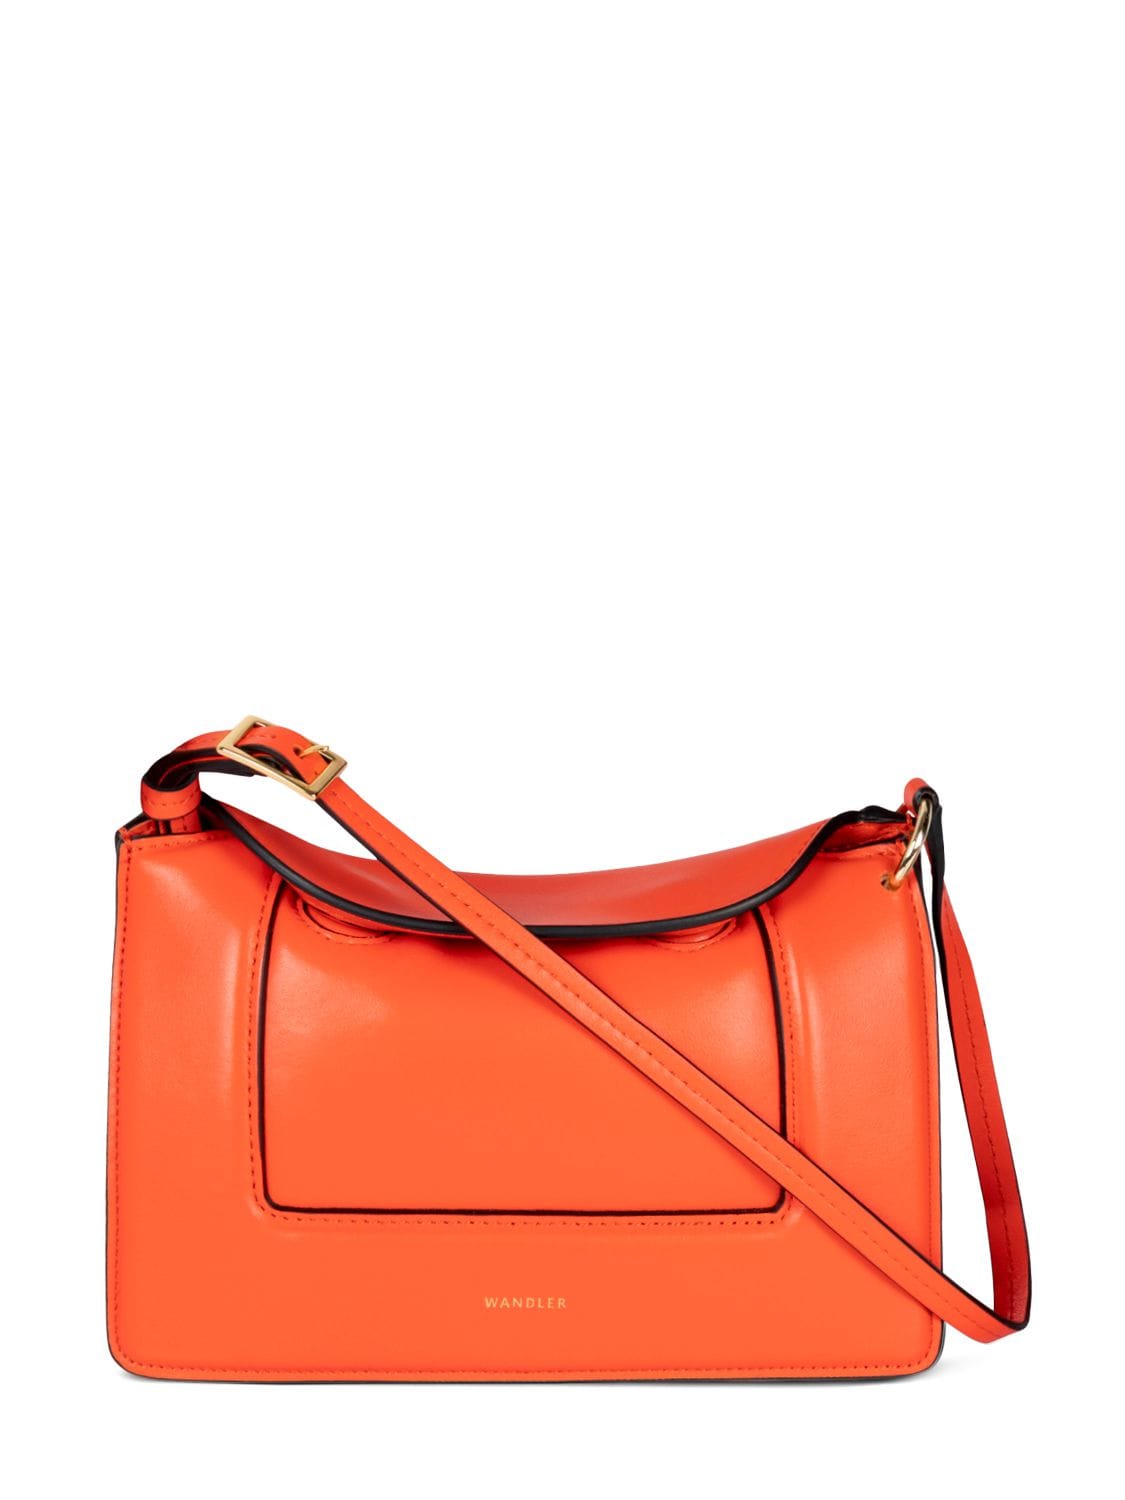 Wandler Micro Penelope Leather Shoulder Bag In Nectar Eclipse